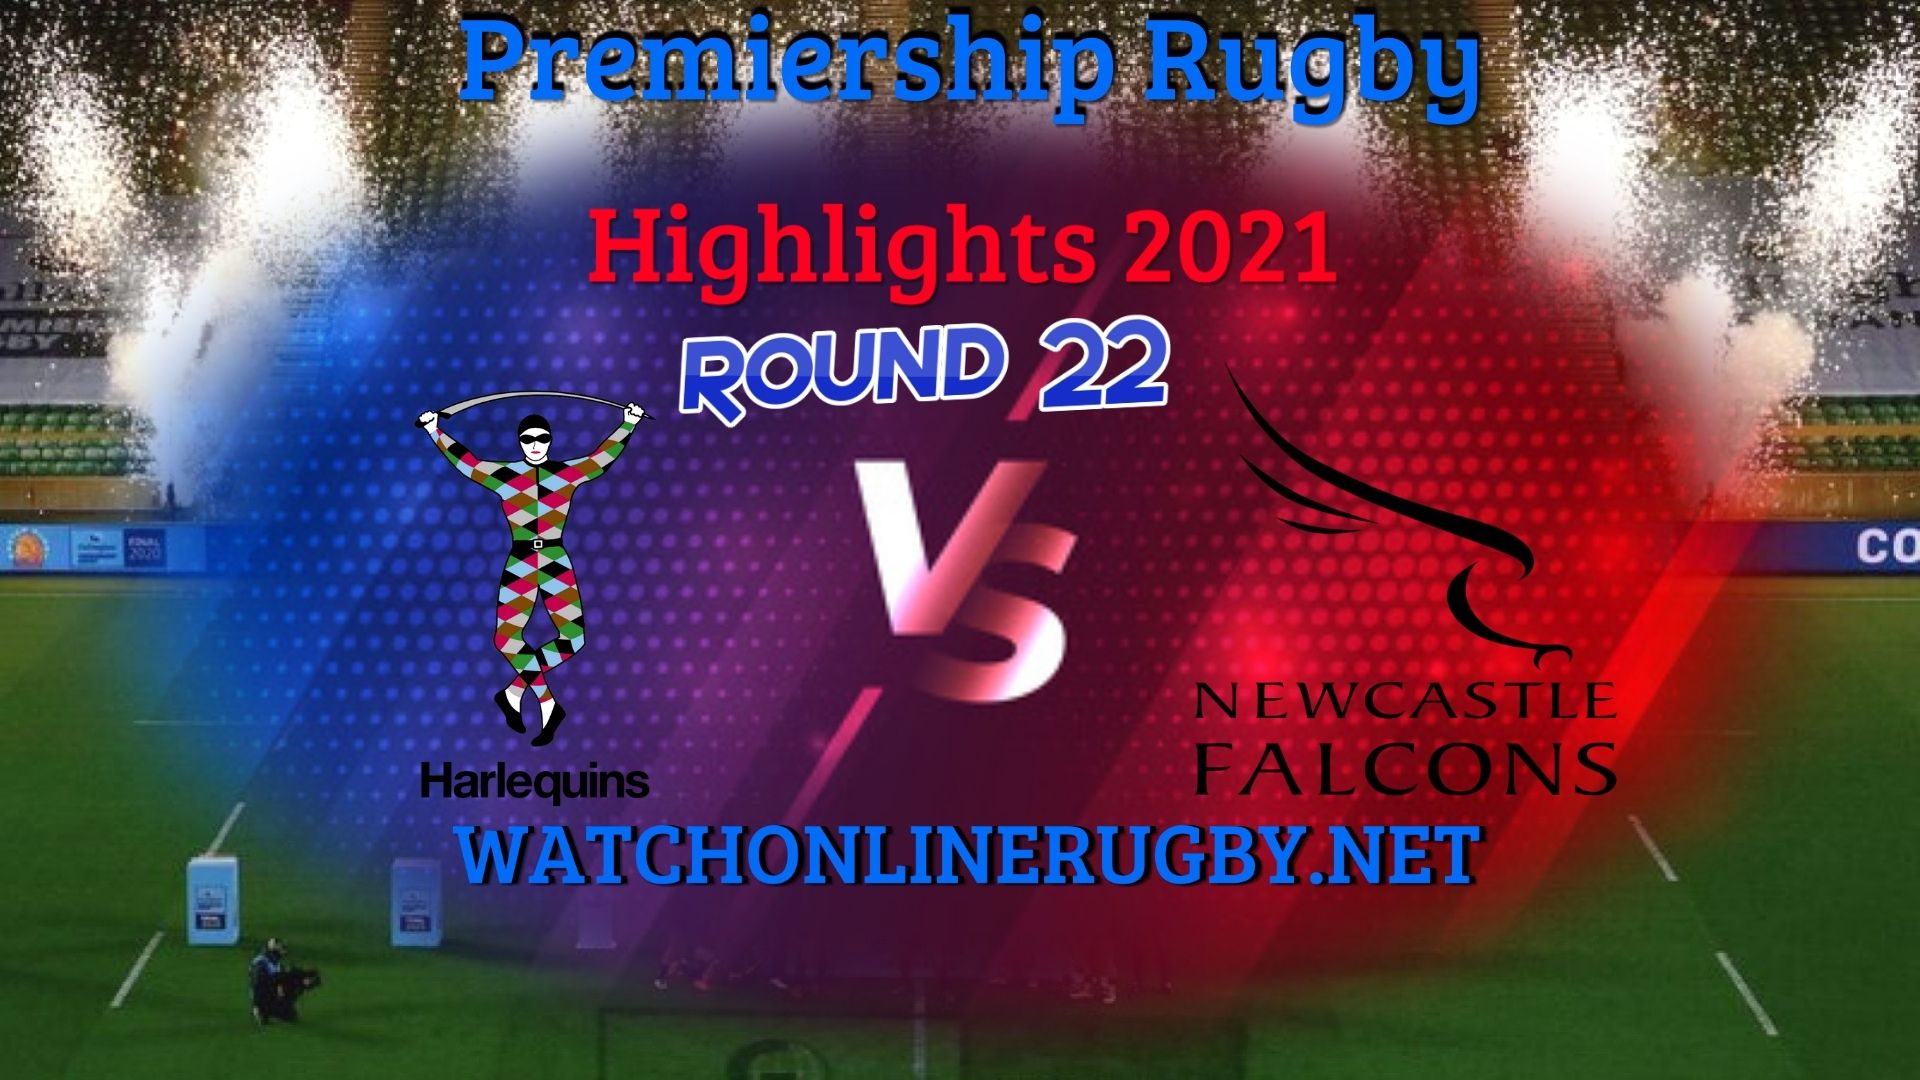 Harlequins Vs Newcastle Falcons Premiership Rugby 2021 RD 22